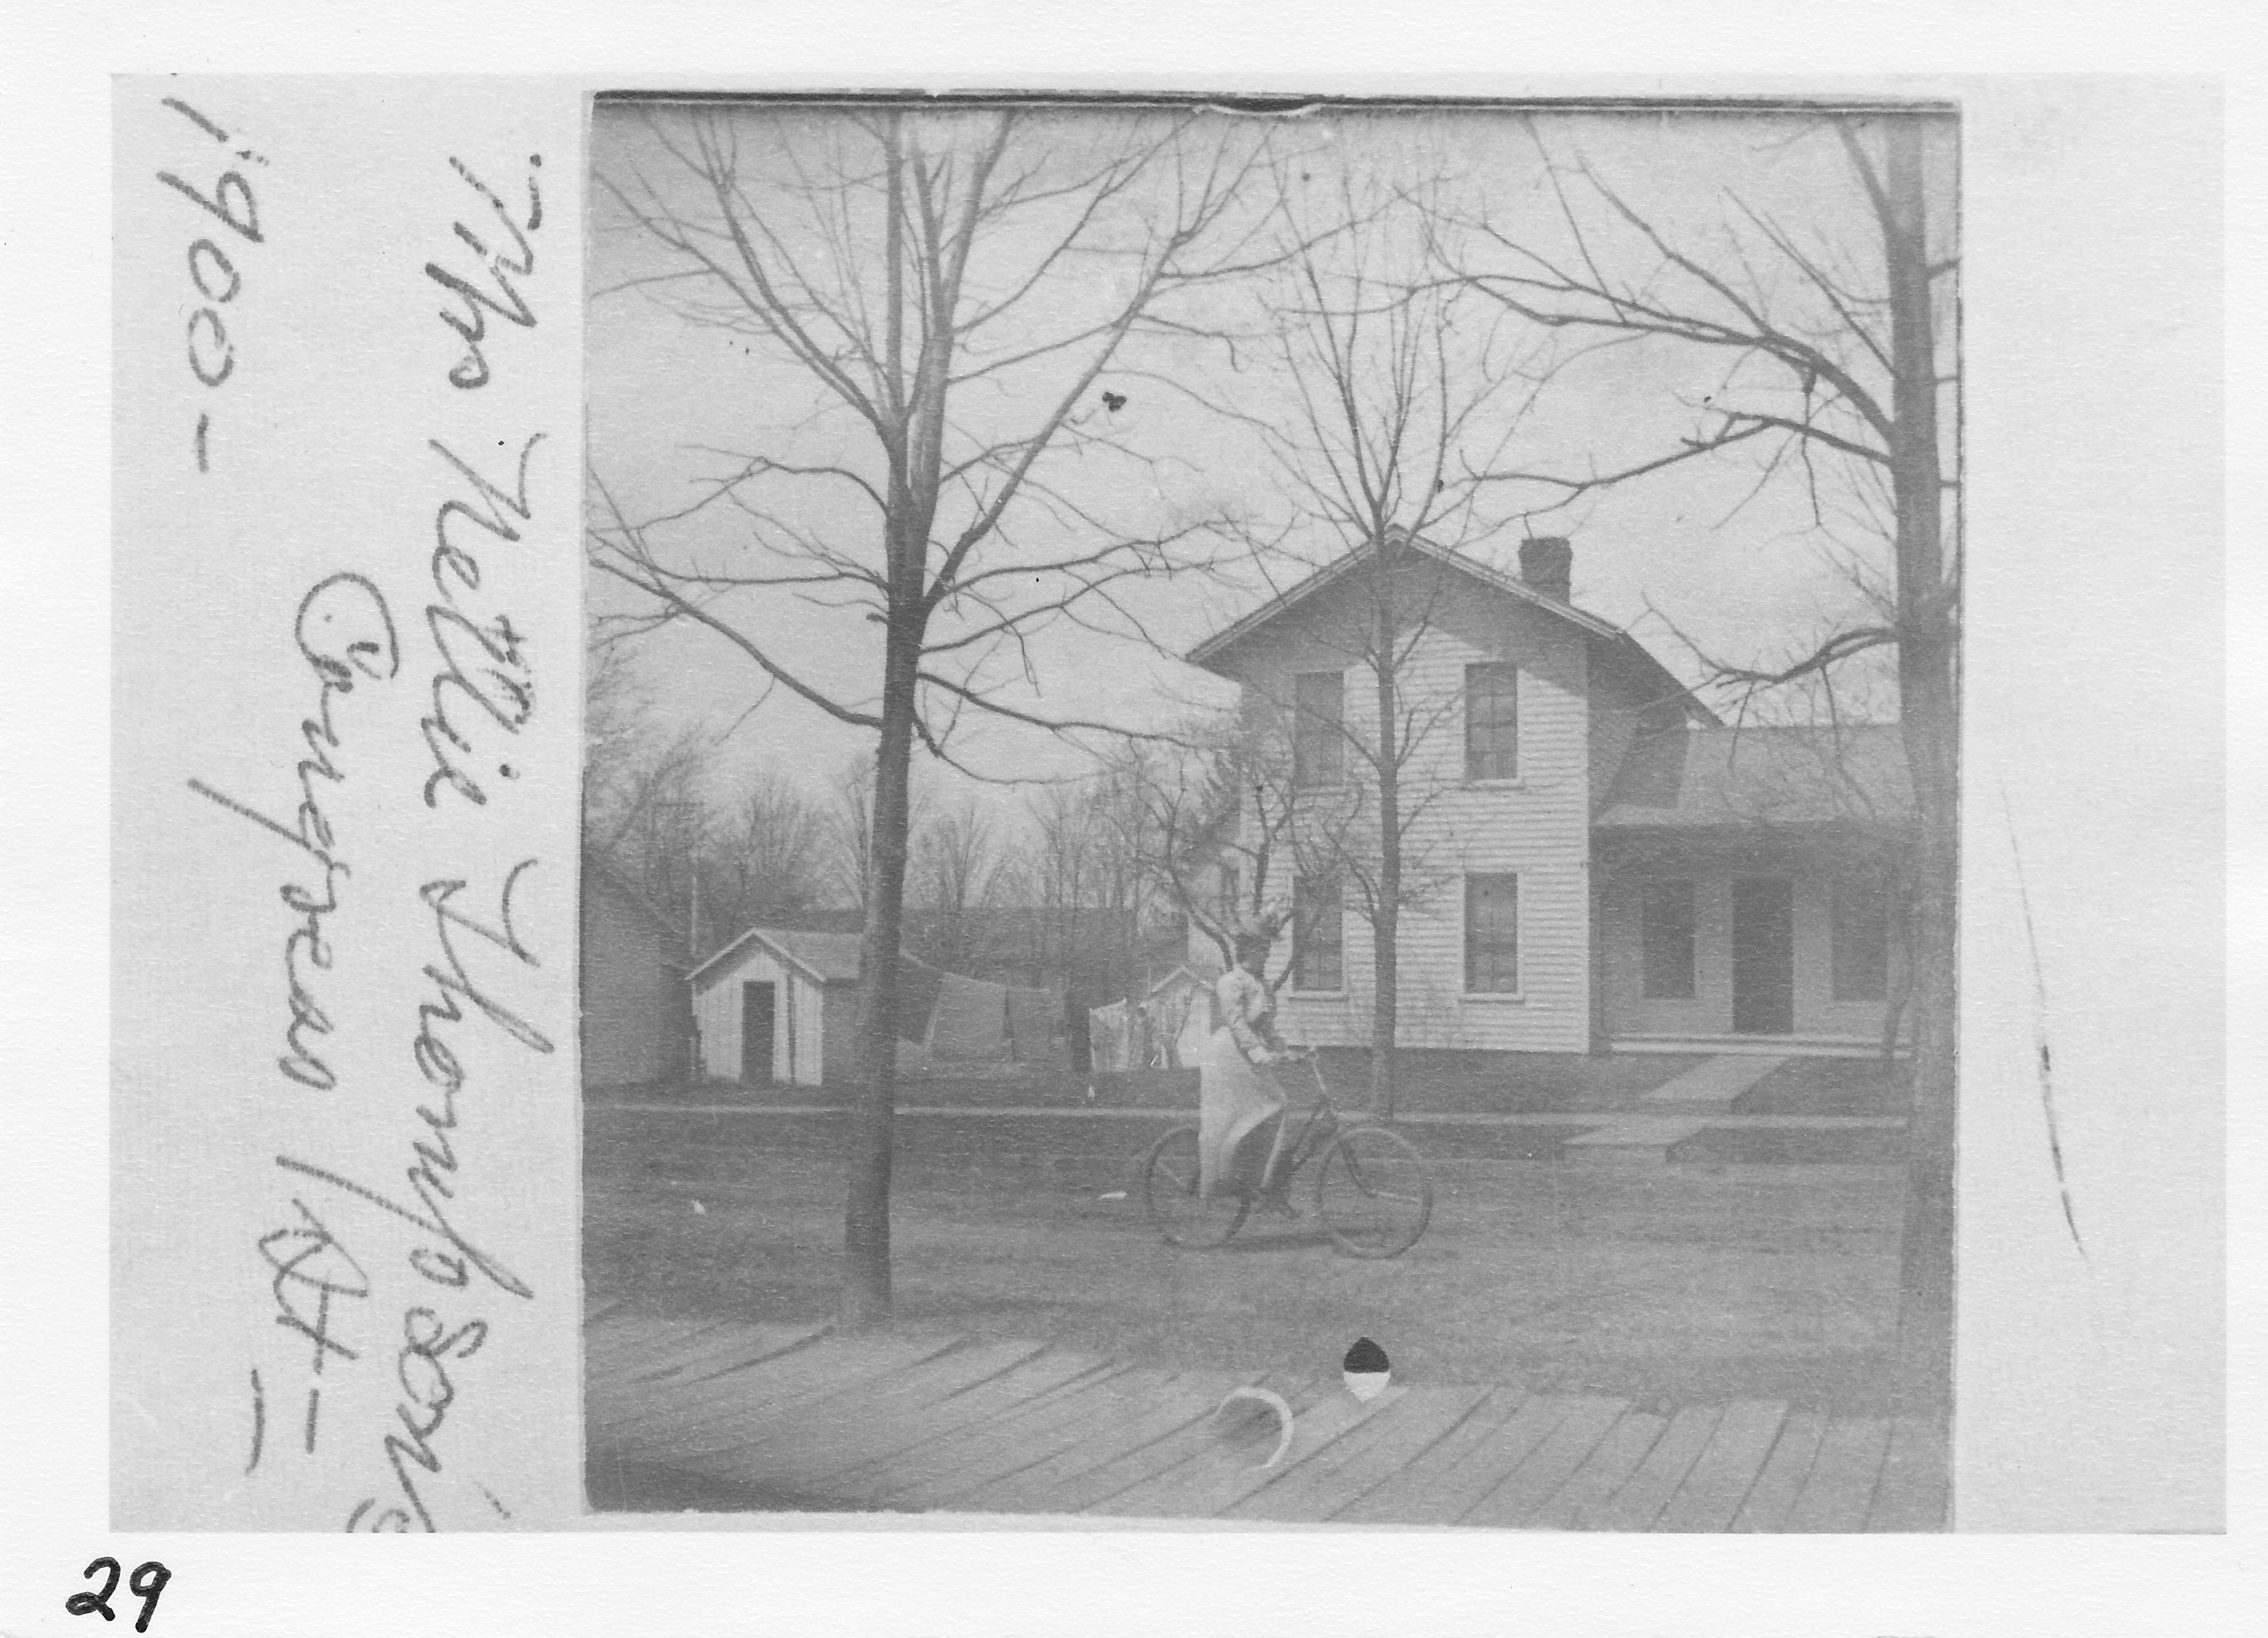 Layton-Thompson house at 132 W. Congress Street.  Built in 1872 by great-grandparents to the Reppert Brothers.  The Laytons celebrated their fiftieth wedding anniversary here.  D. S. Williams’ Lumber Yard in rear, also corner of Berry house in center rear.  Woodshed and rear of Juna Chase house at left.  One of the Murfitt girls on bicycle.